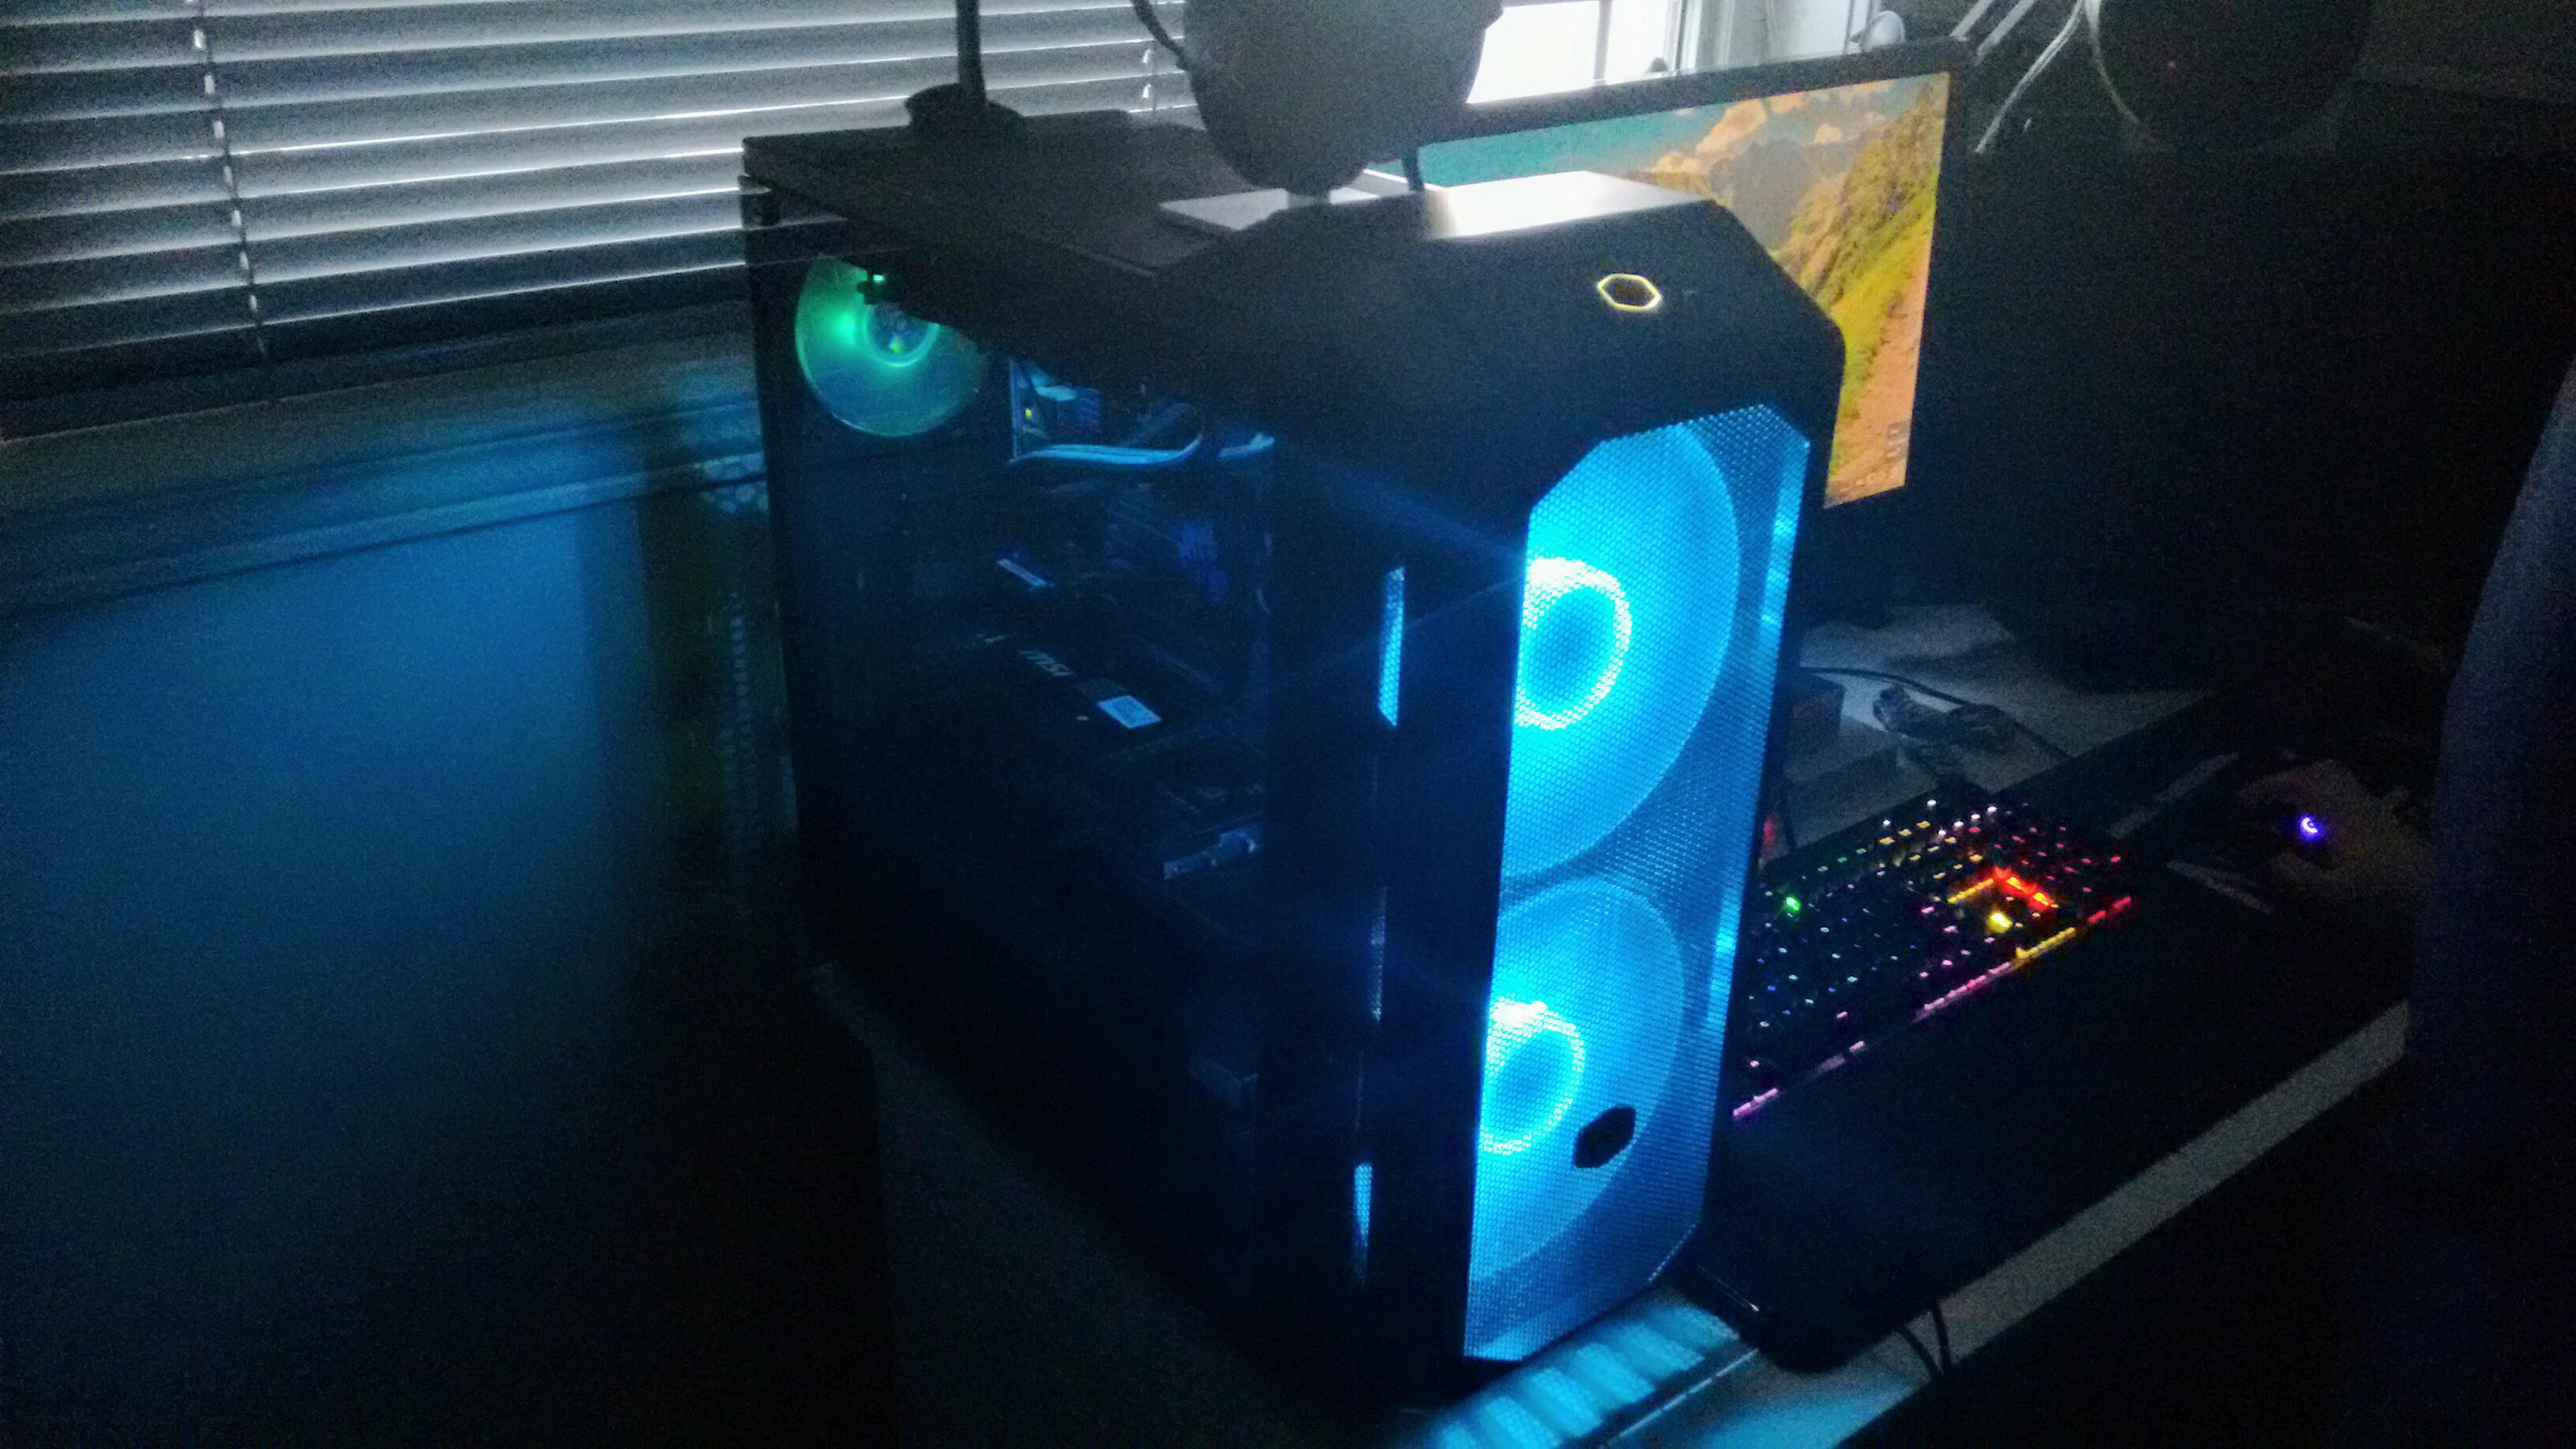 A Gaming PC with RGB lighting